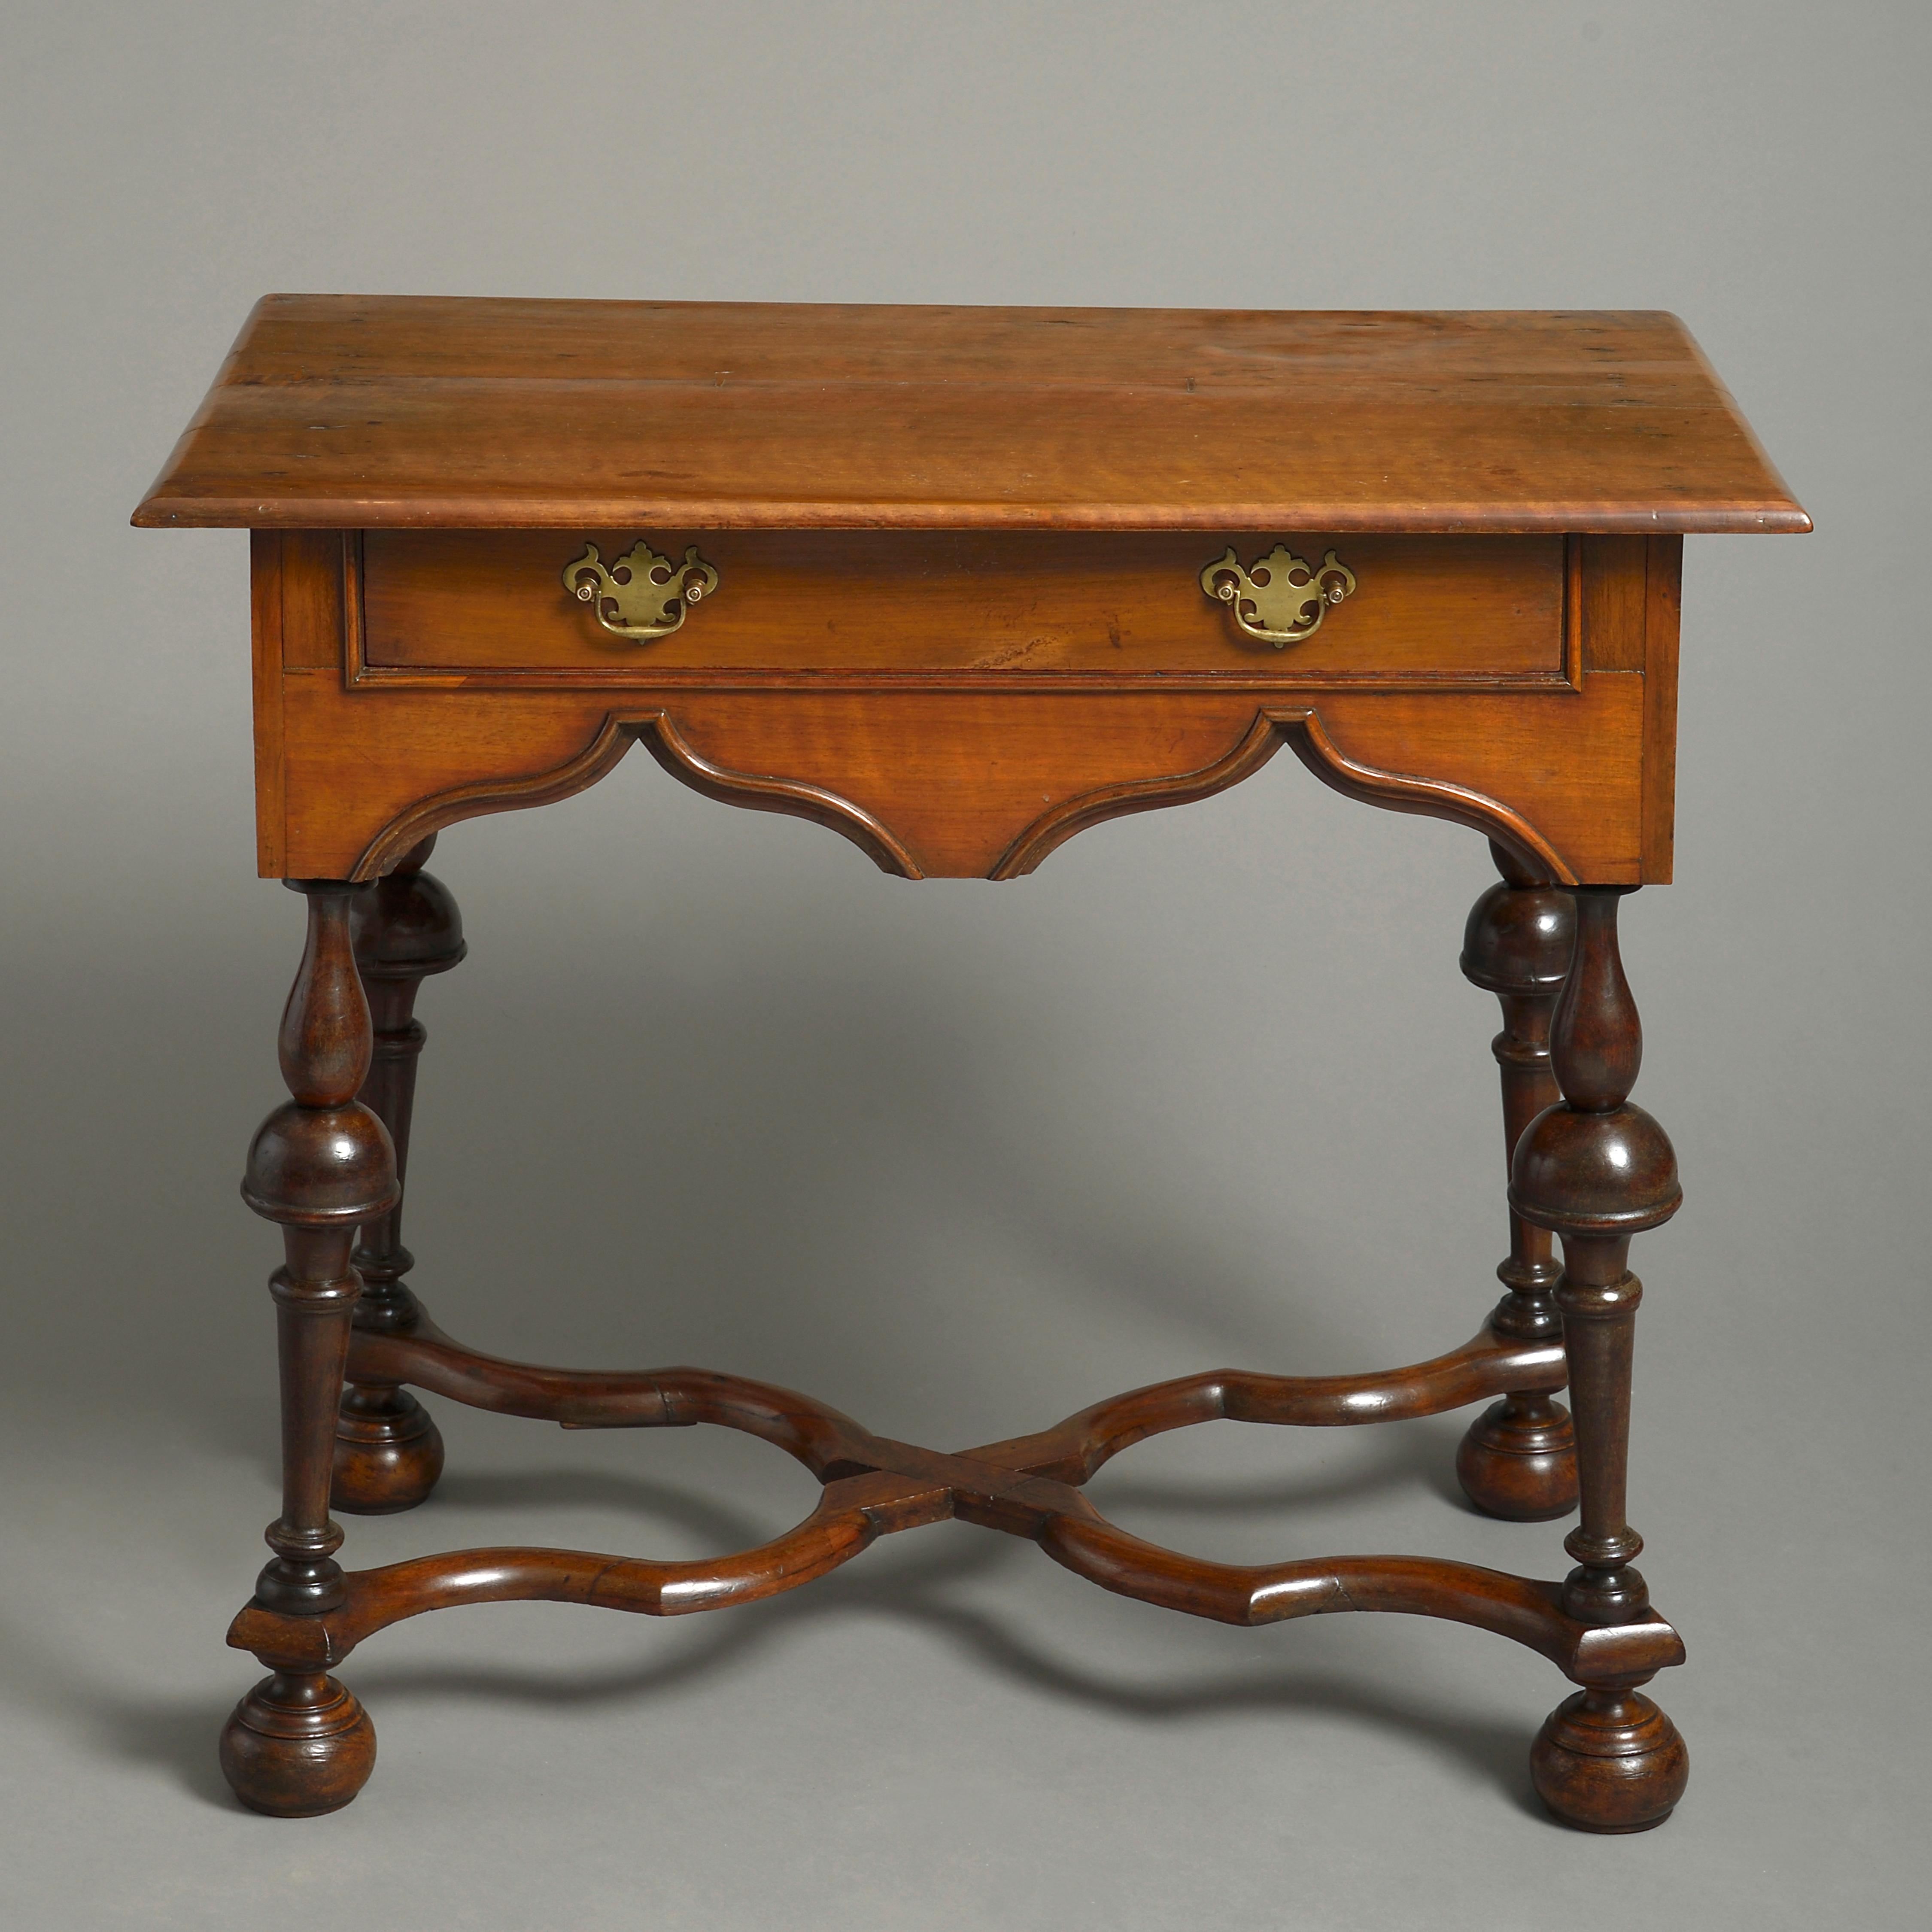 A late 19th century side table in the late 17th century Charles II manner, of soft faded colour, the overhanging top above a shaped frieze with single drawer with brass handles, raised on turned baluster legs with X-form stretcher and bun feet.